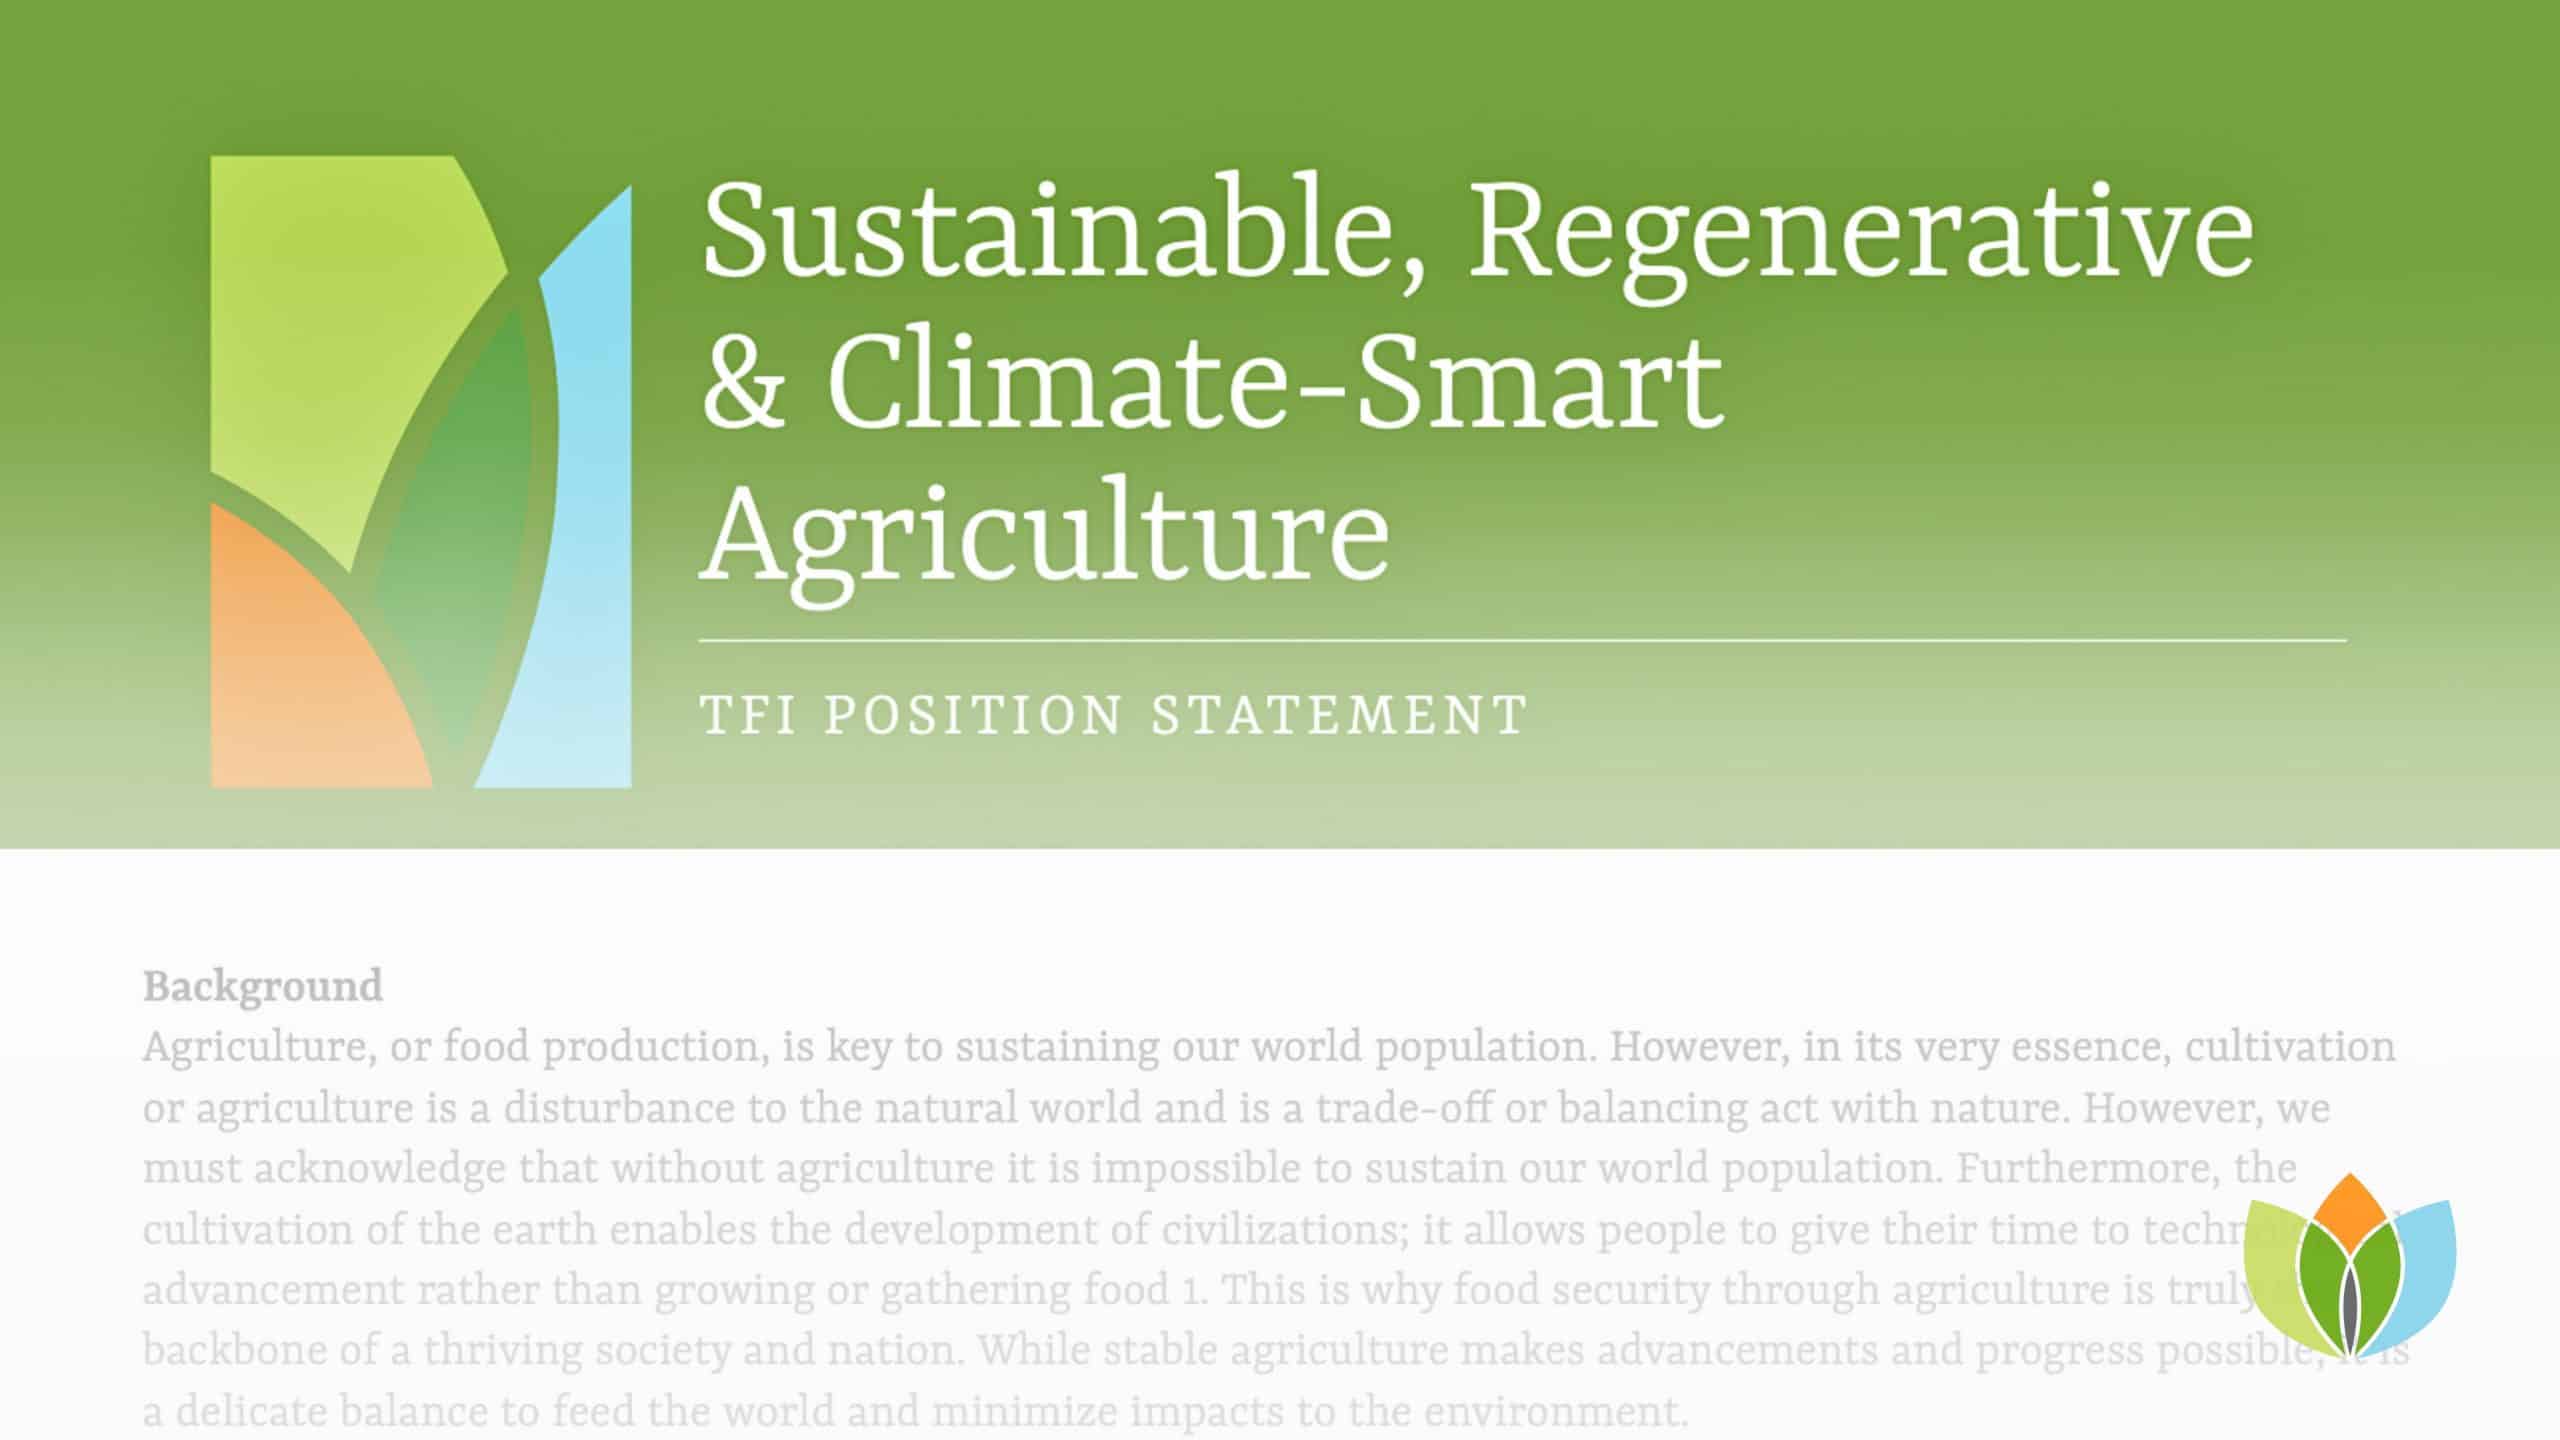 Statement on Sustainable, Regenerative and Climate Smart Agriculture